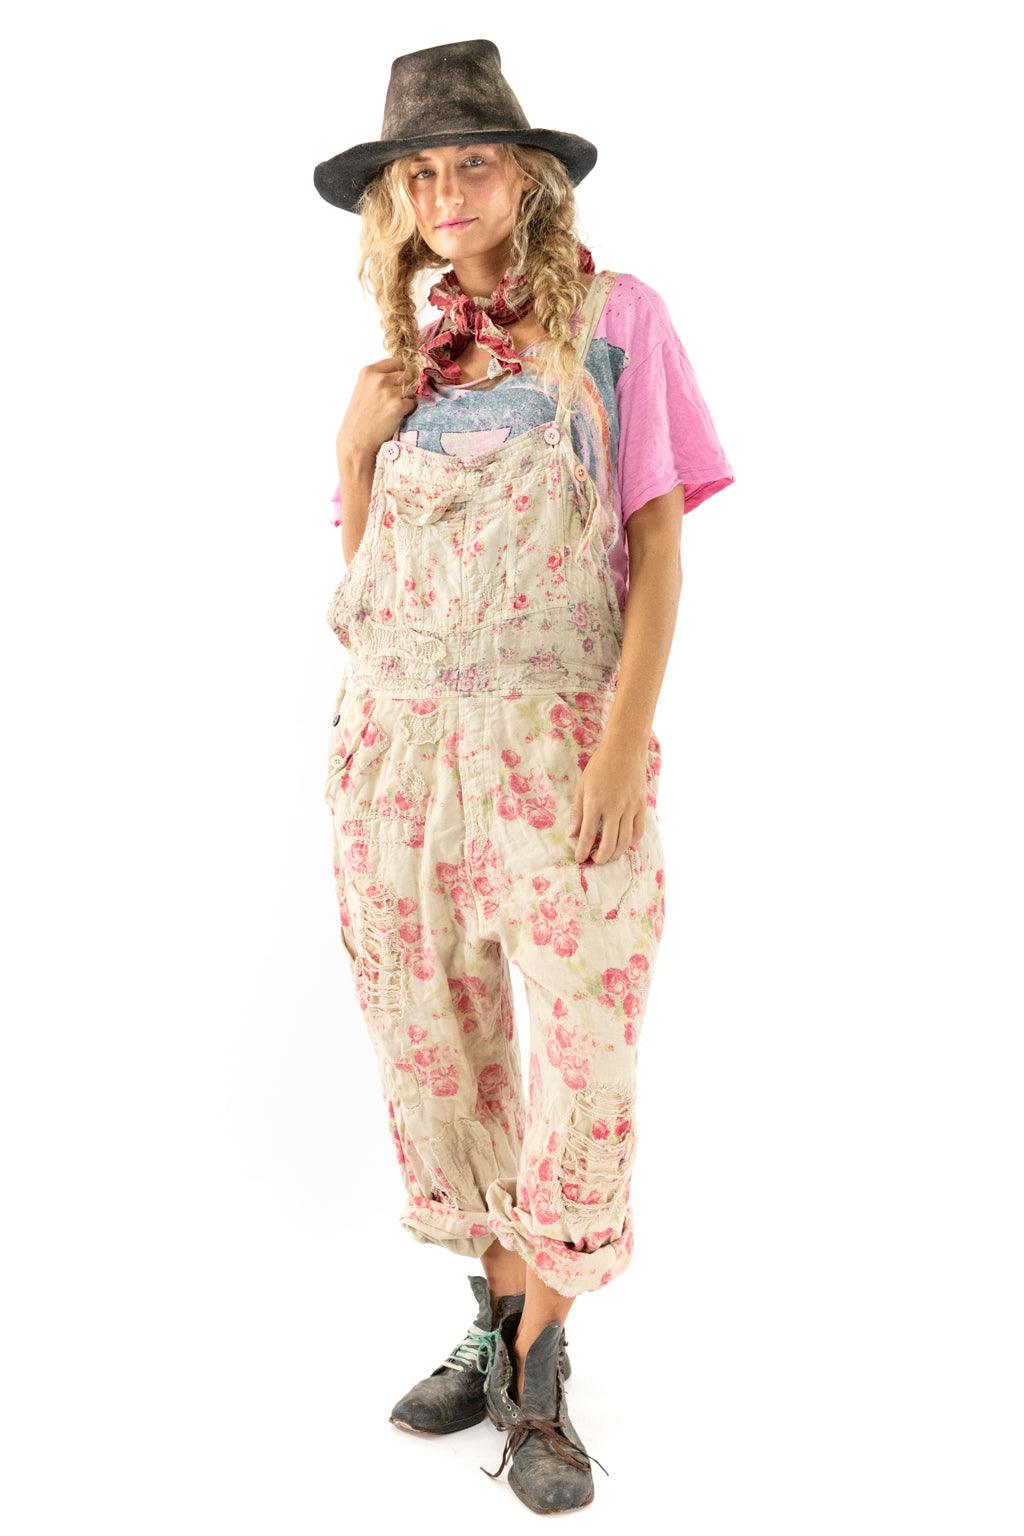 Floral Print Overalls - Magnolia Pearl Clothing